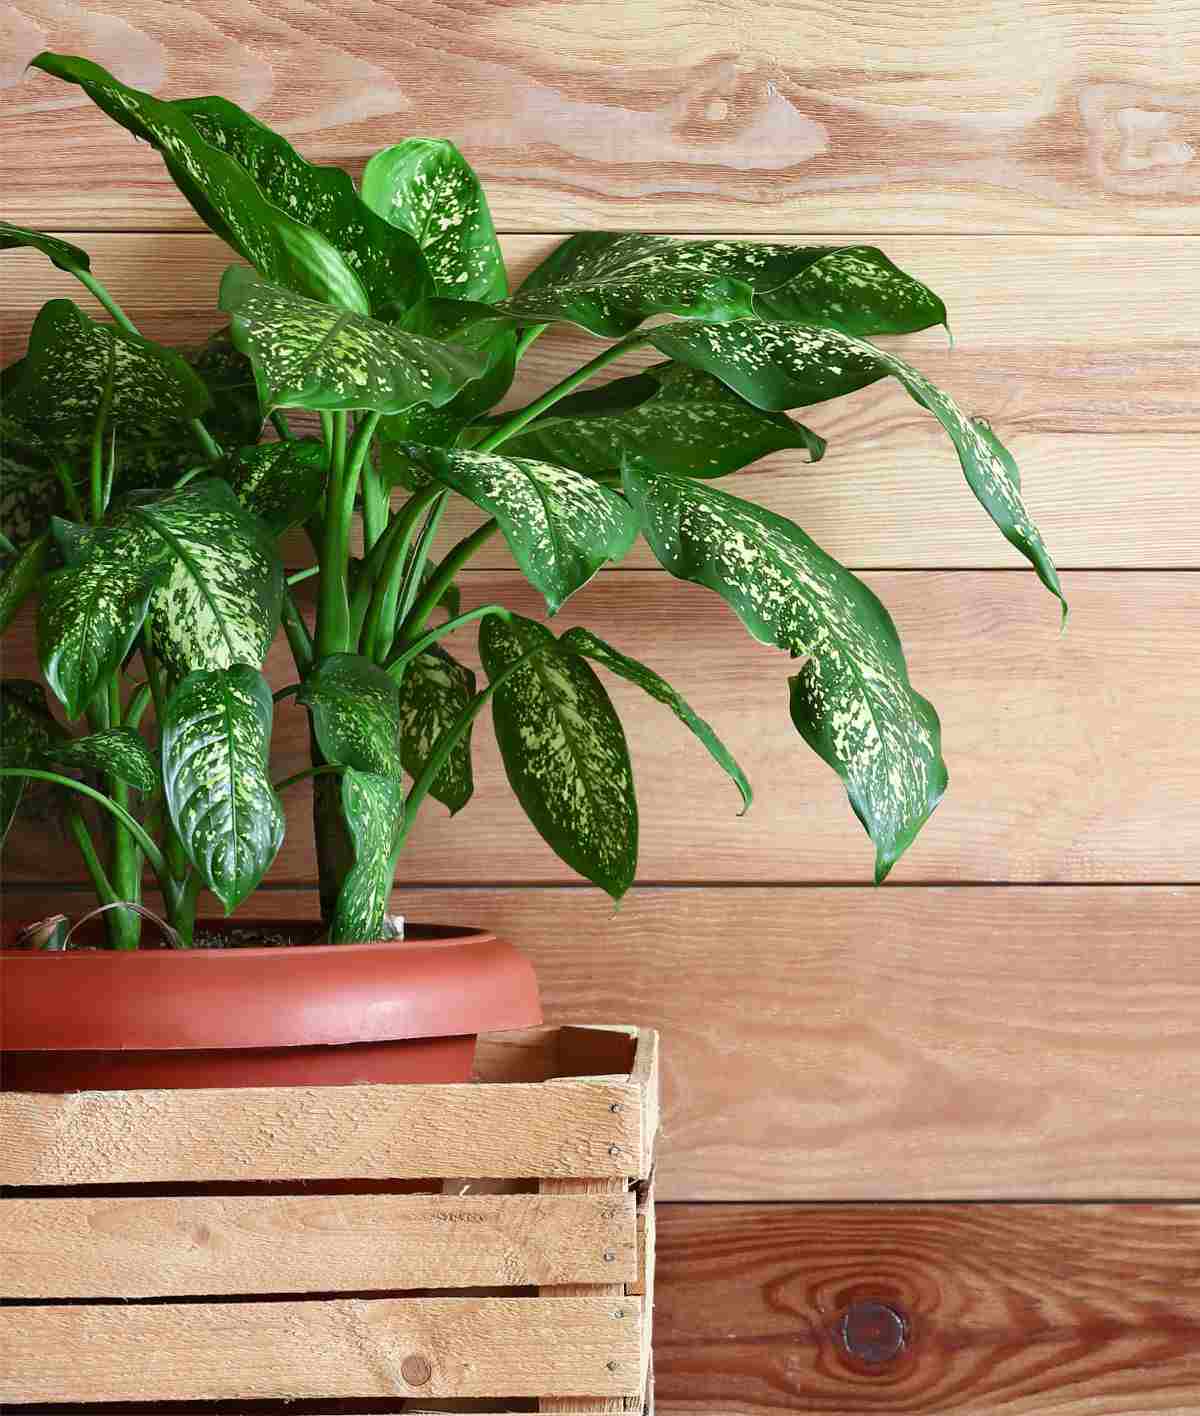 Dumb cane plant in a pot inside a wooden planter.